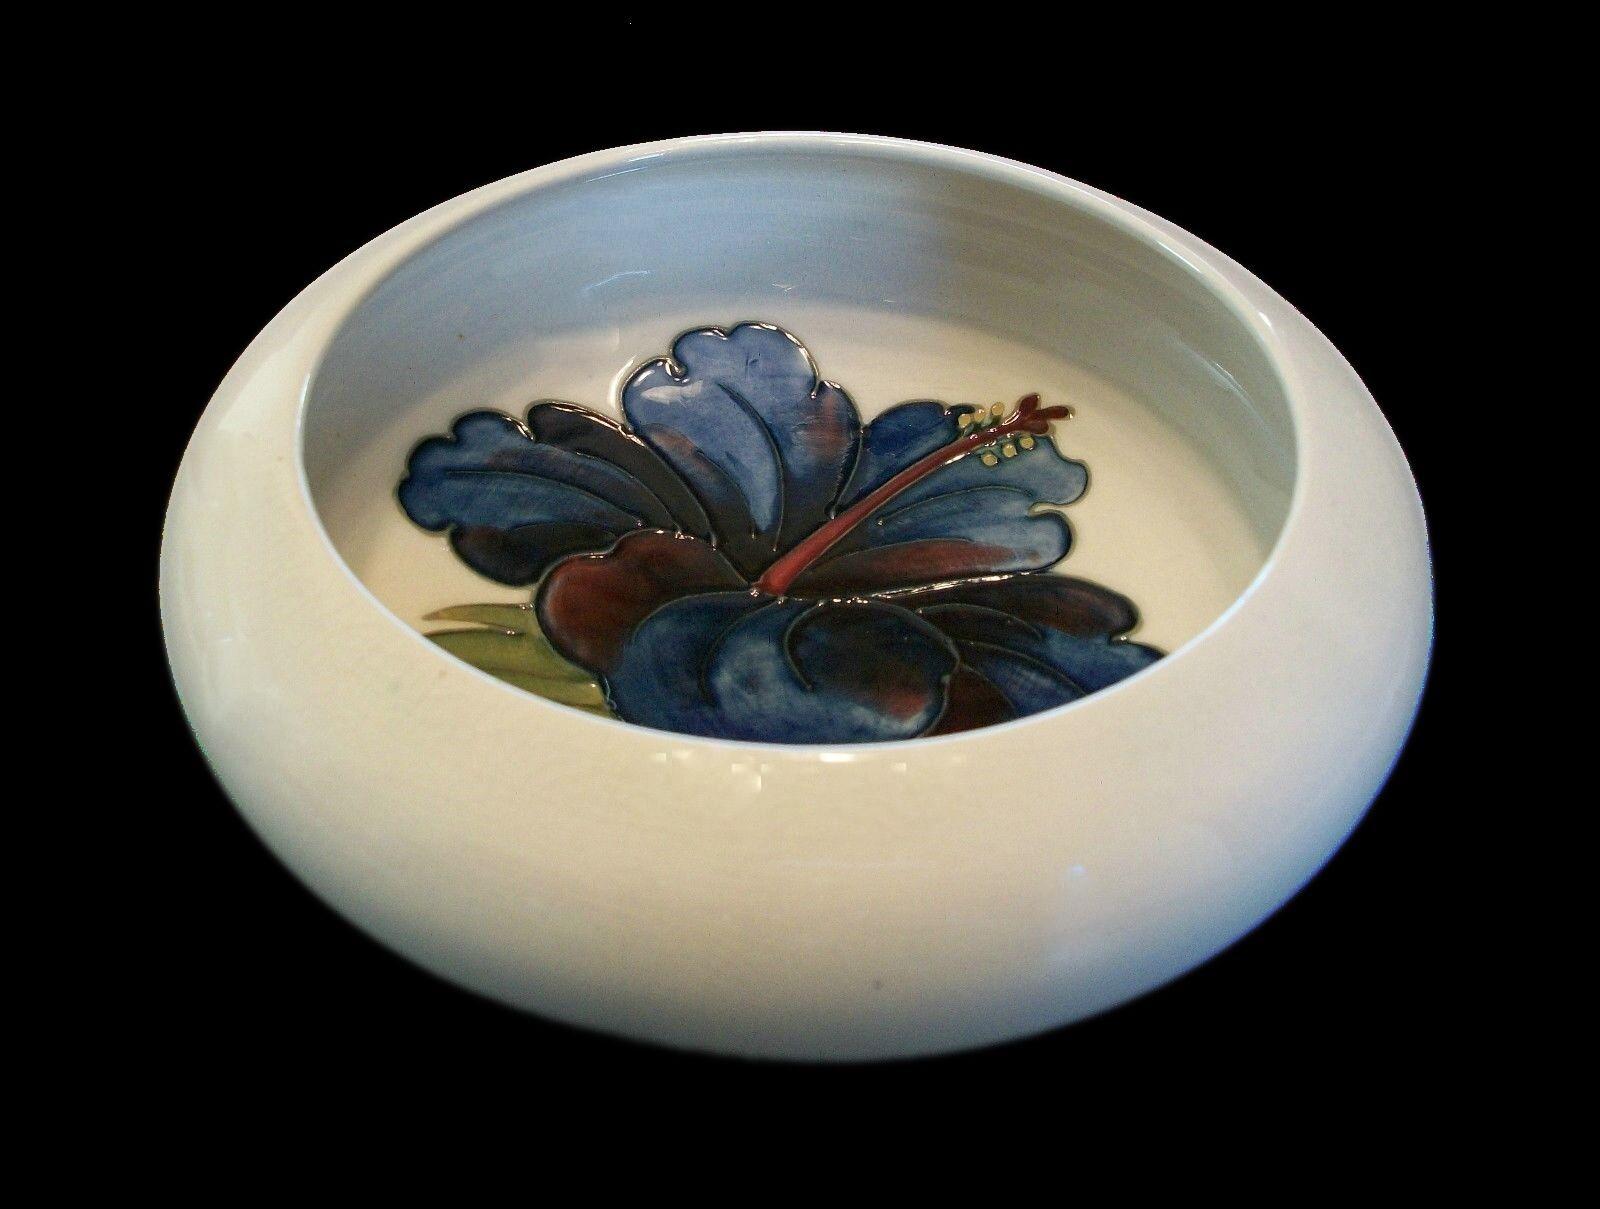 Moorcroft (Walter) - Vintage 'Hibiscus' pattern ceramic bowl with inverted rim - hand painted decoration to the interior - signed on the base with remnants of the original factory sticker - United Kingdom - mid 20th century.

Excellent vintage